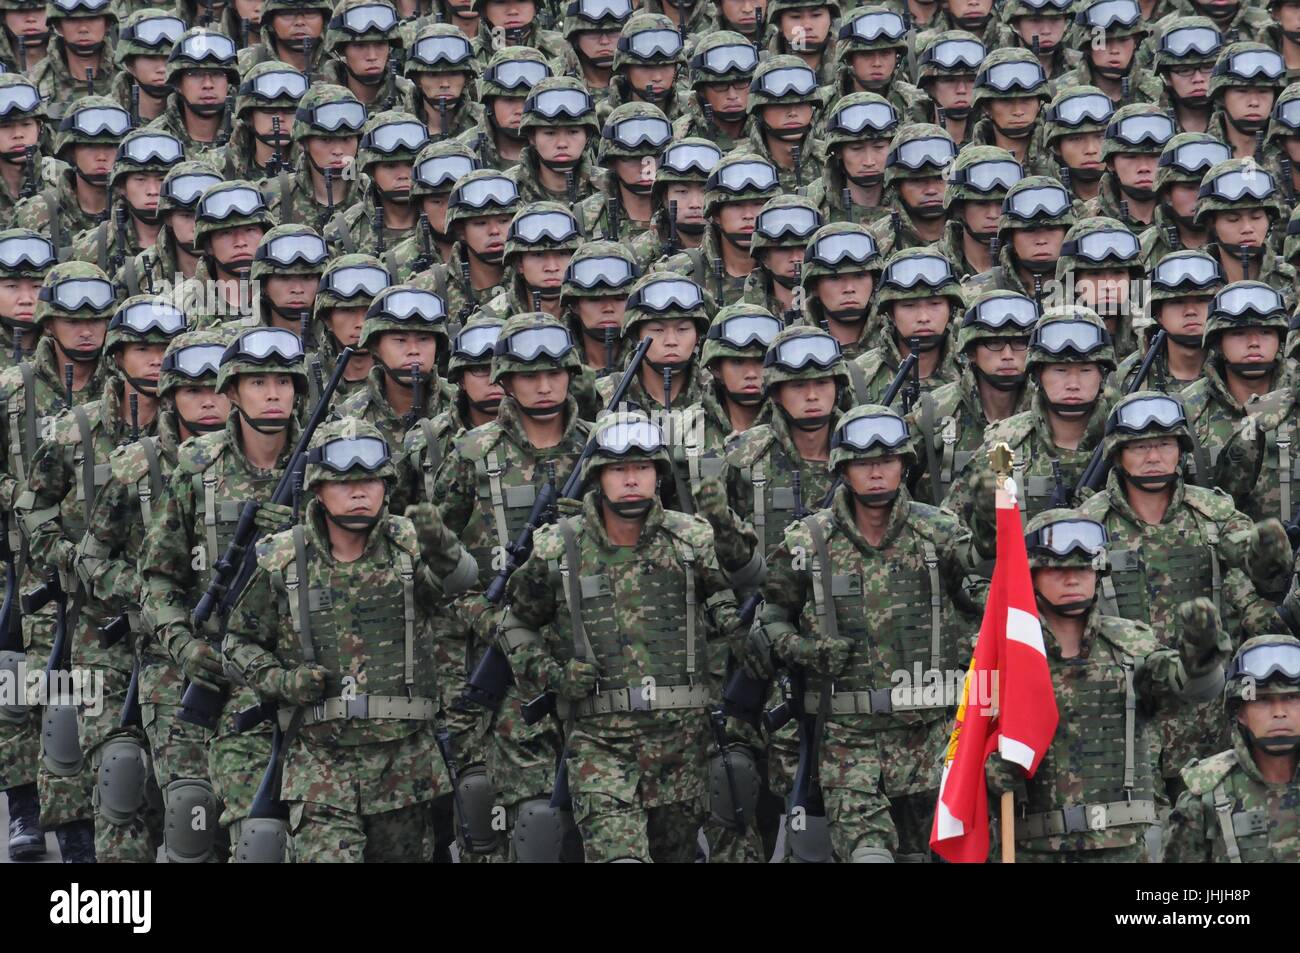 Japanese Self-Defense Force soldiers march in formation during the